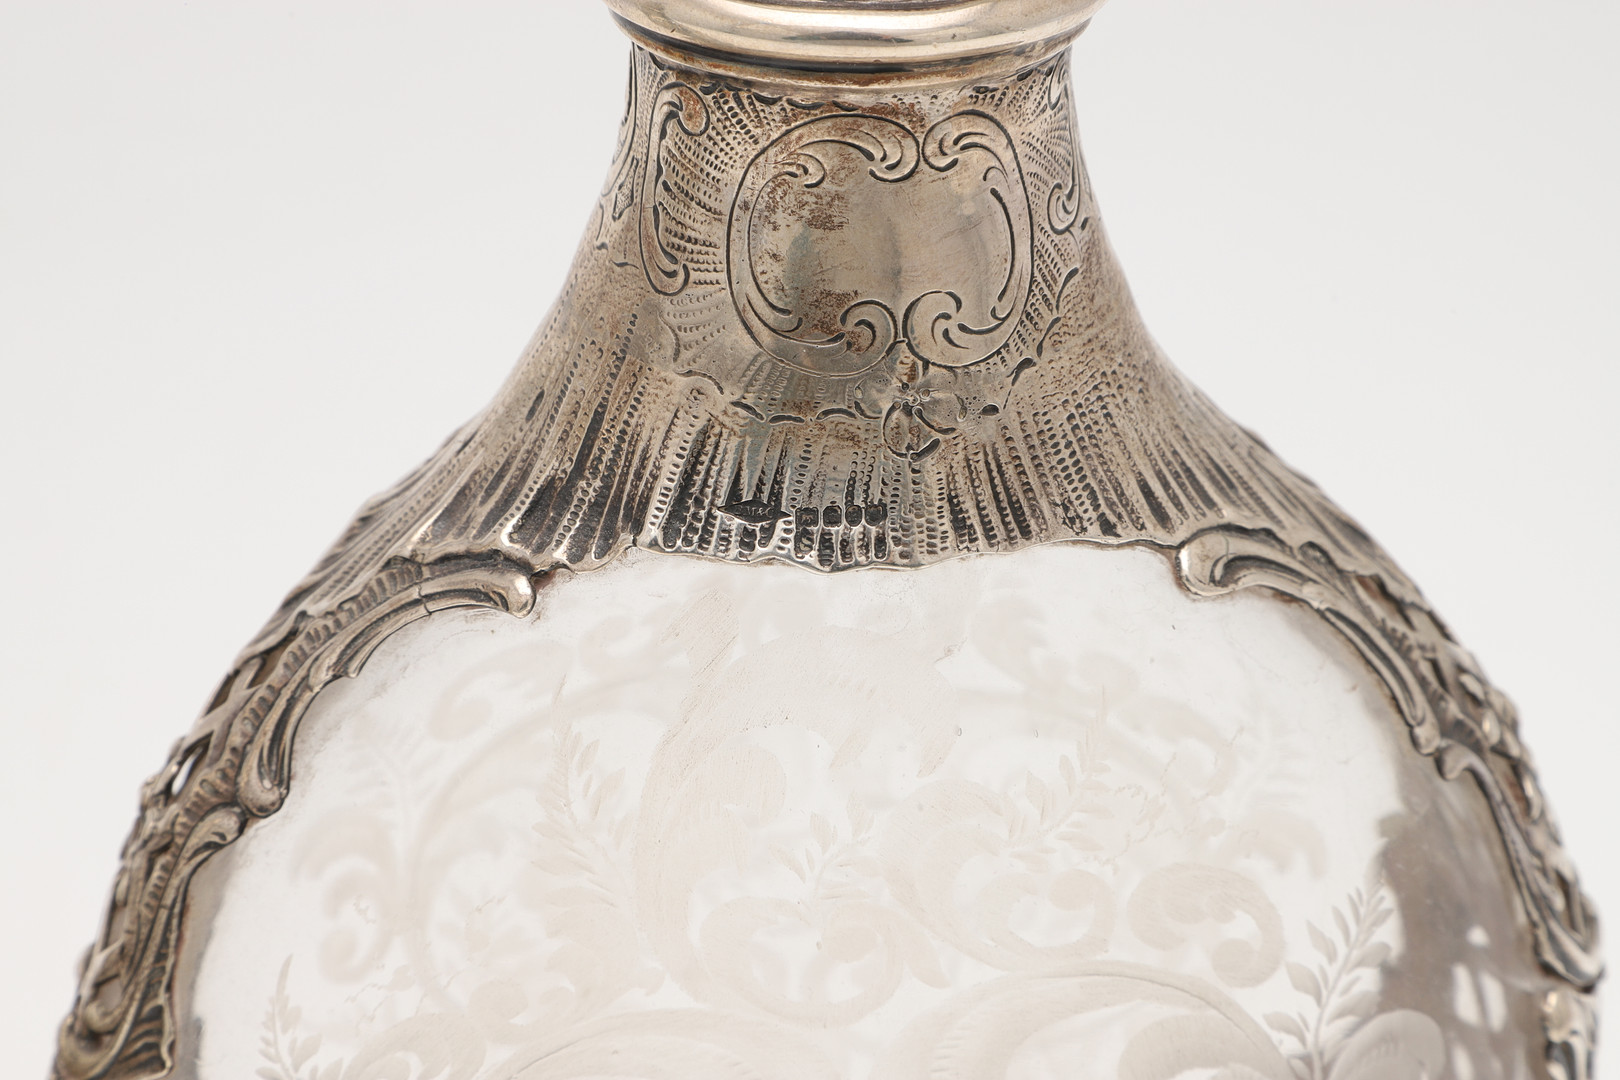 A PAIR OF LATE 19TH/ EARLY 20TH CENTURY GERMAN SILVER MOUNTED DECANTERS. - Image 11 of 13